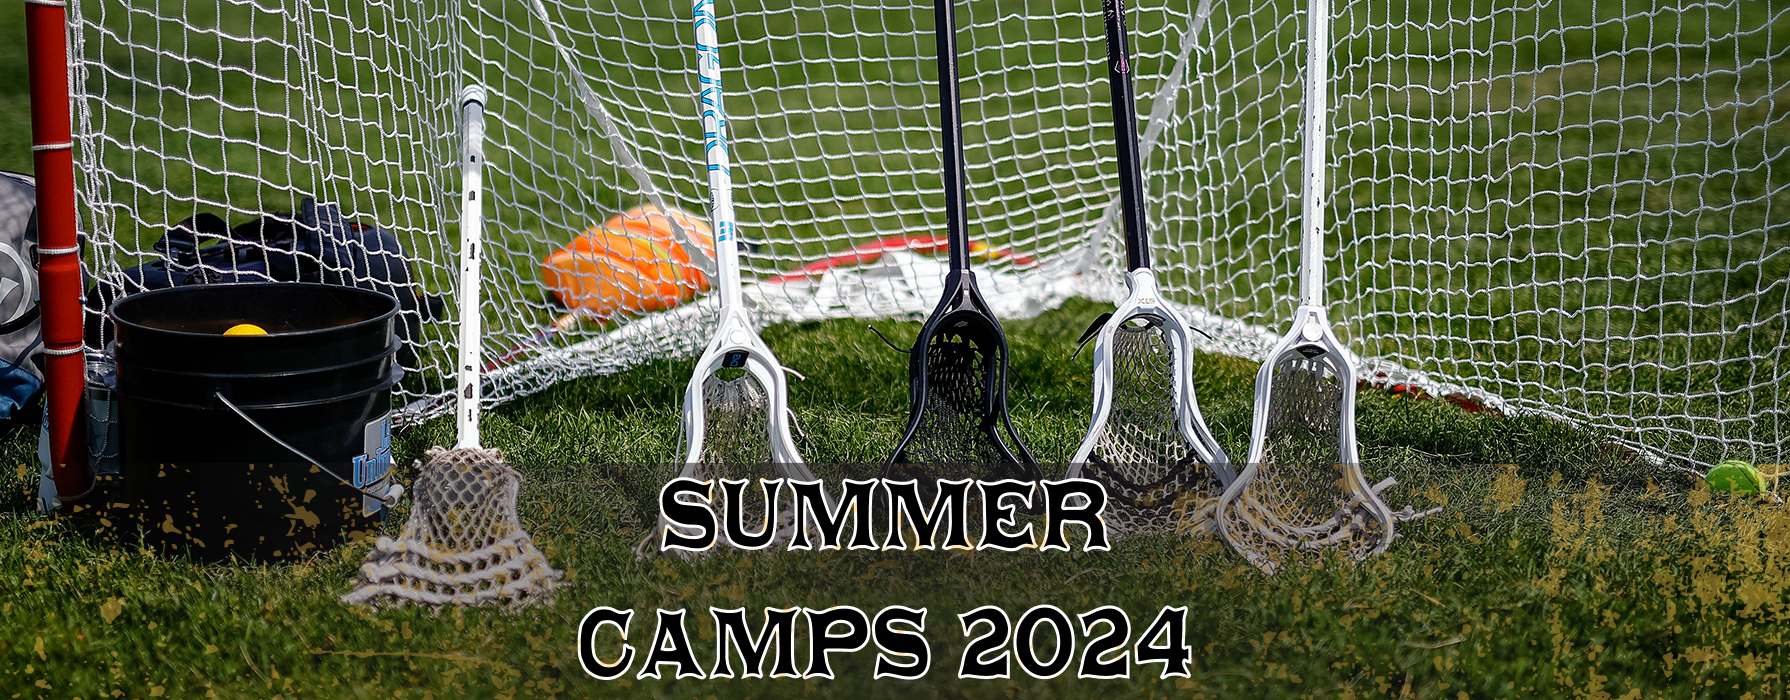 Camps 2024 Promo 4.png